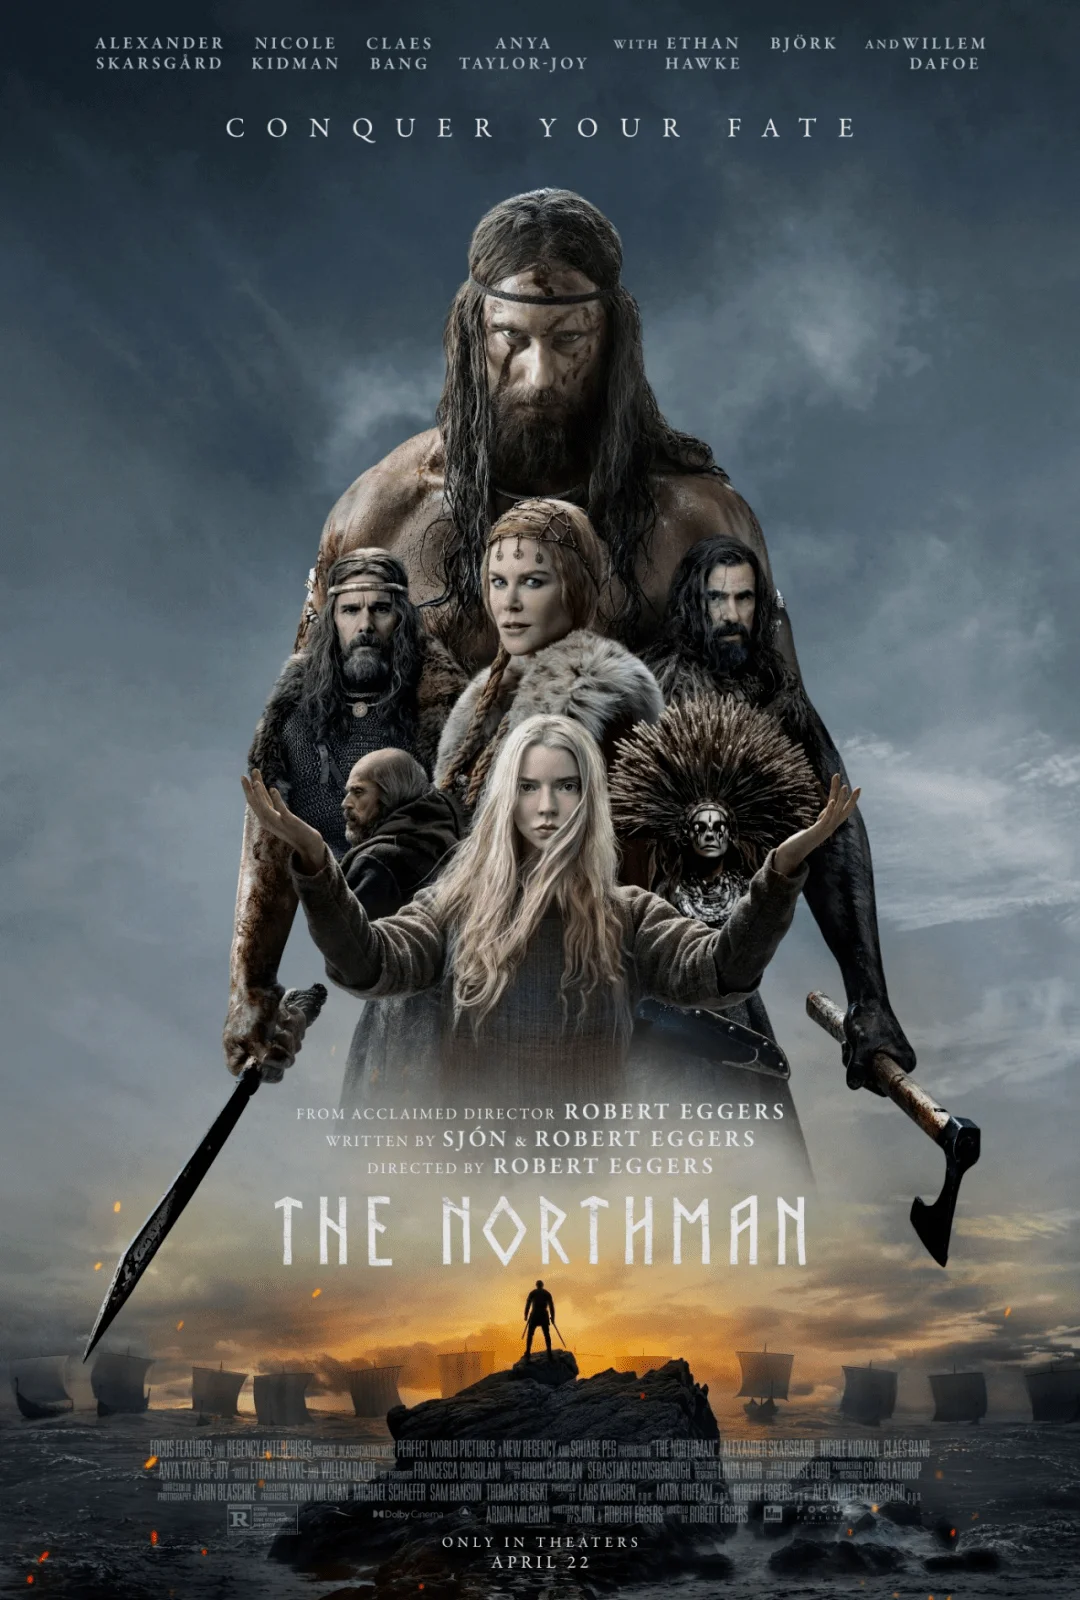 Why is "The Northman" so popular?